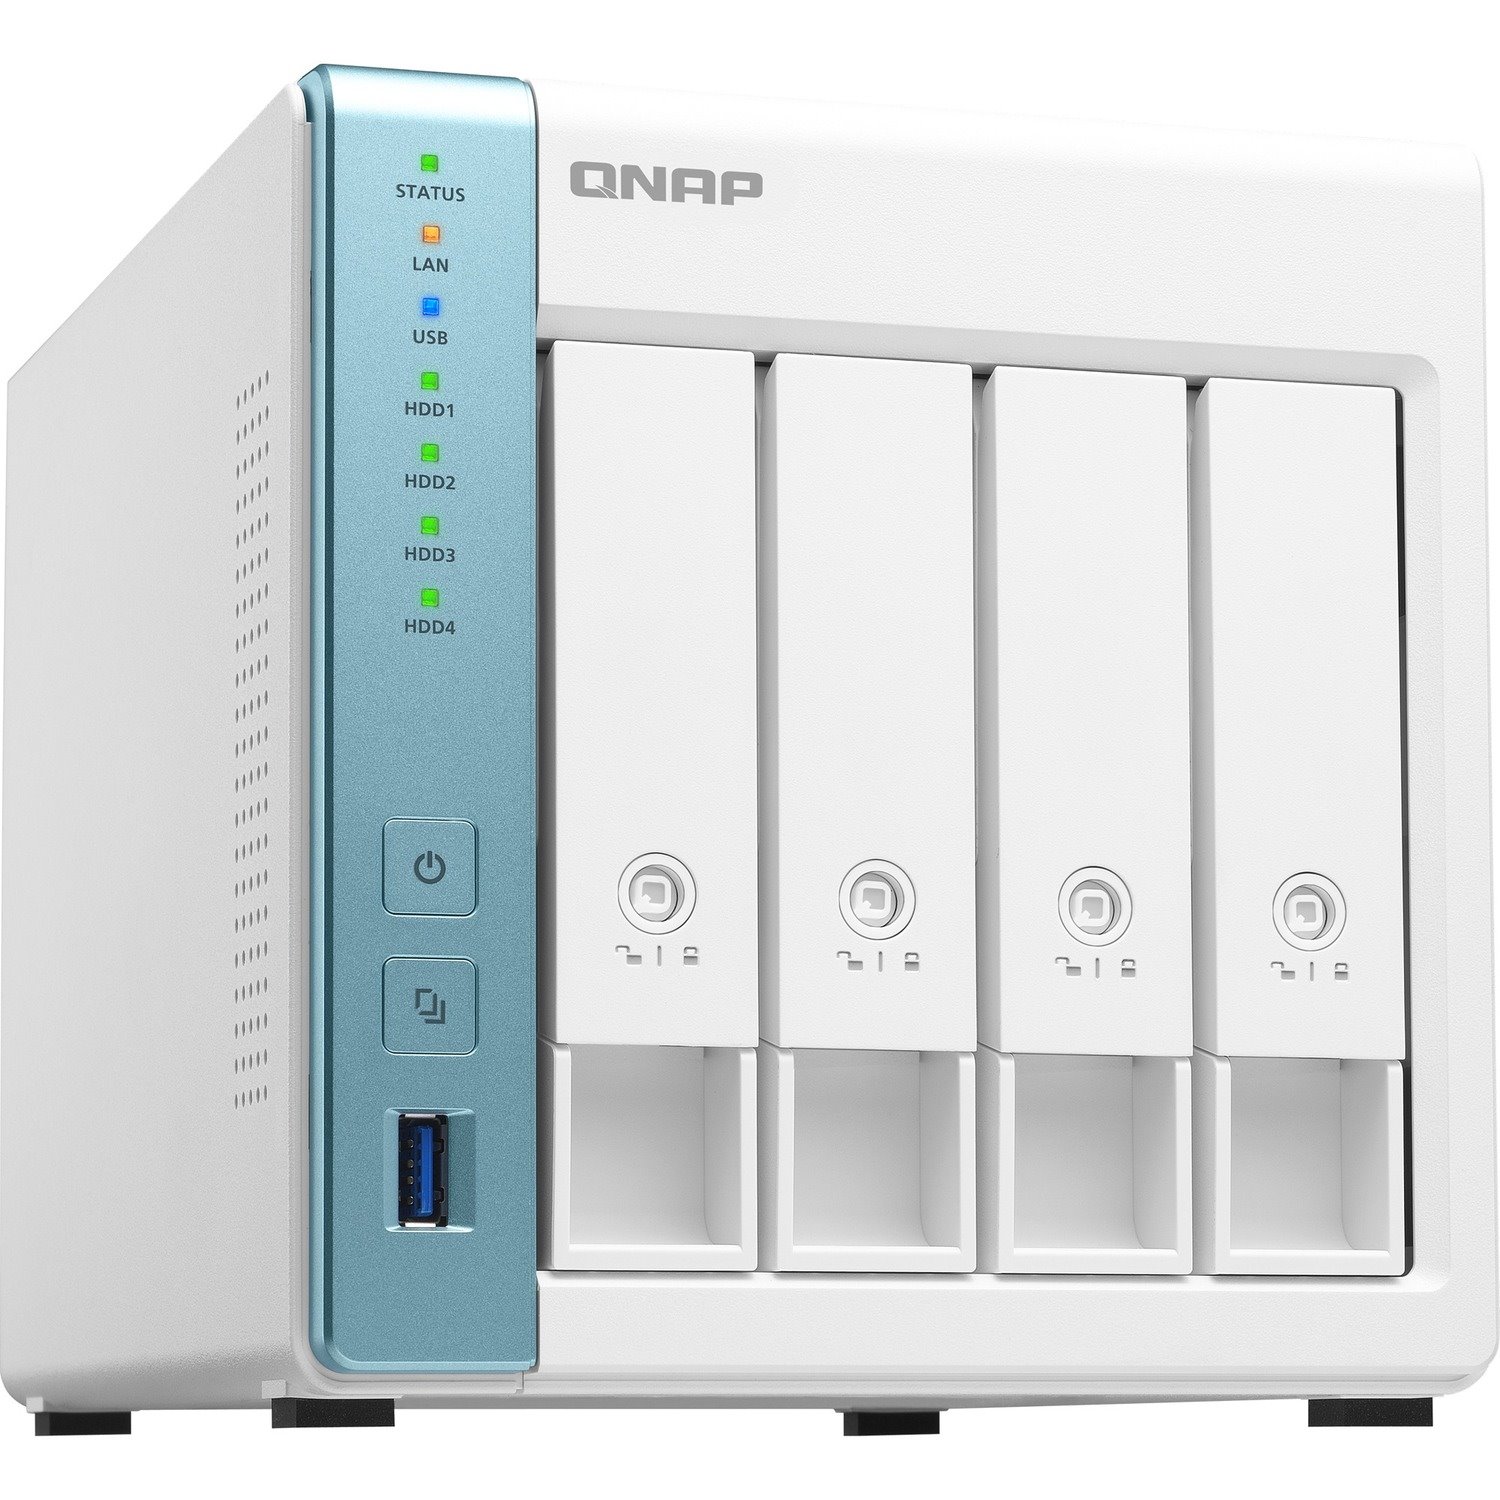 QNAP Quad-core 1.7GHz NAS with 2.5GbE and Feature-rich Applications for Home & Office